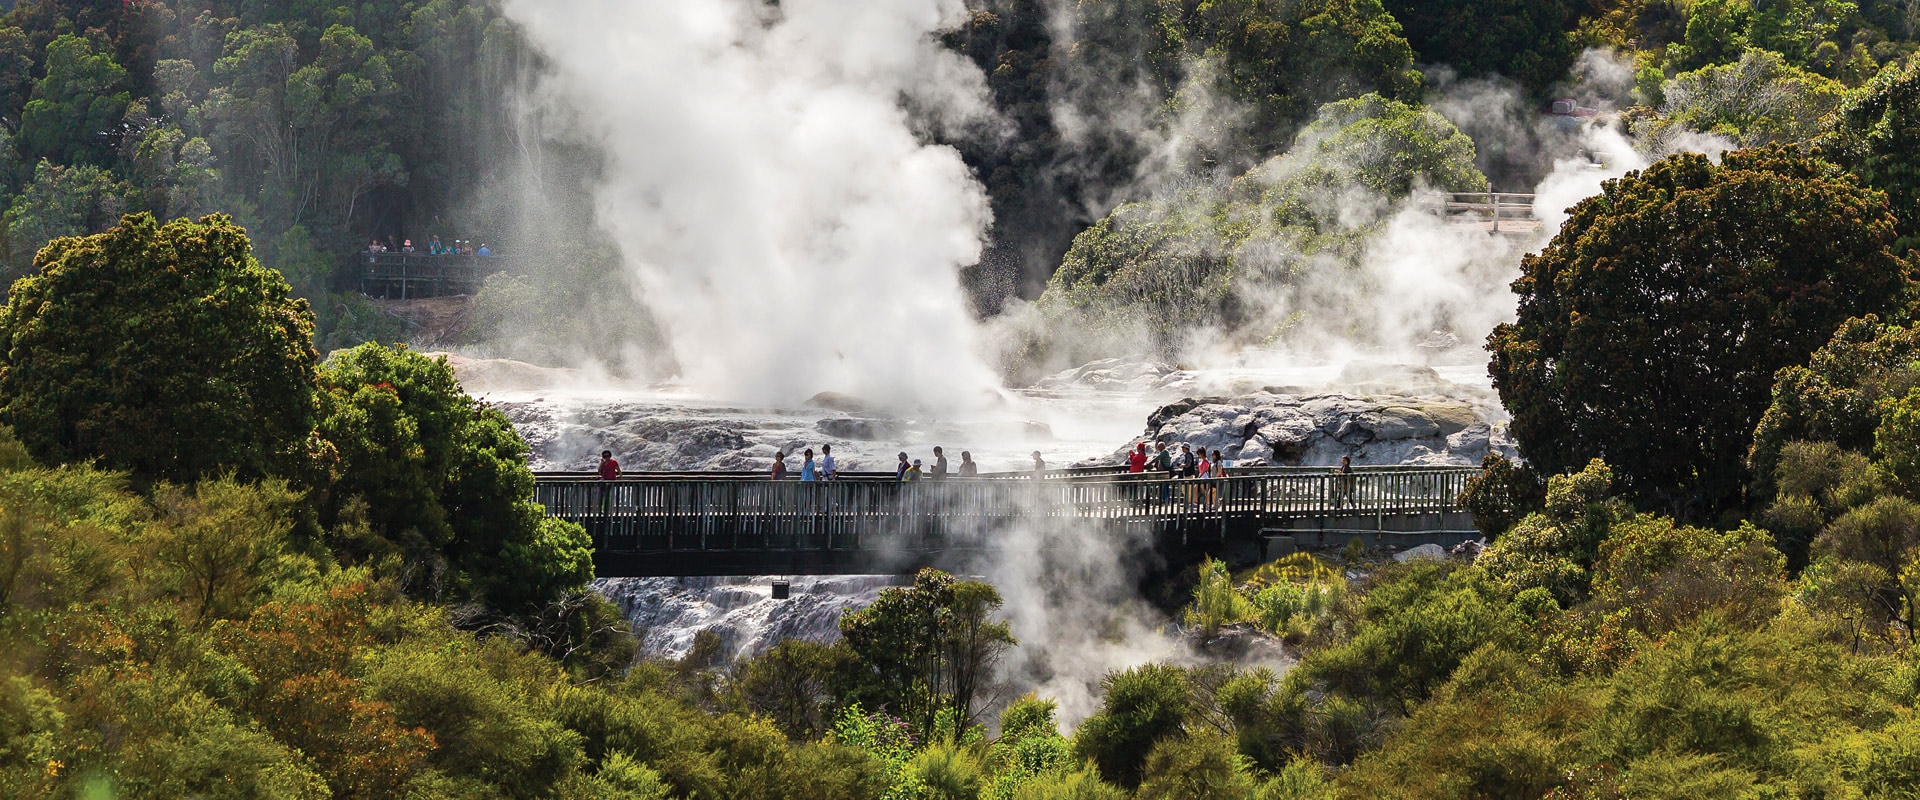 View looking across to a steaming geyser, New Zealand